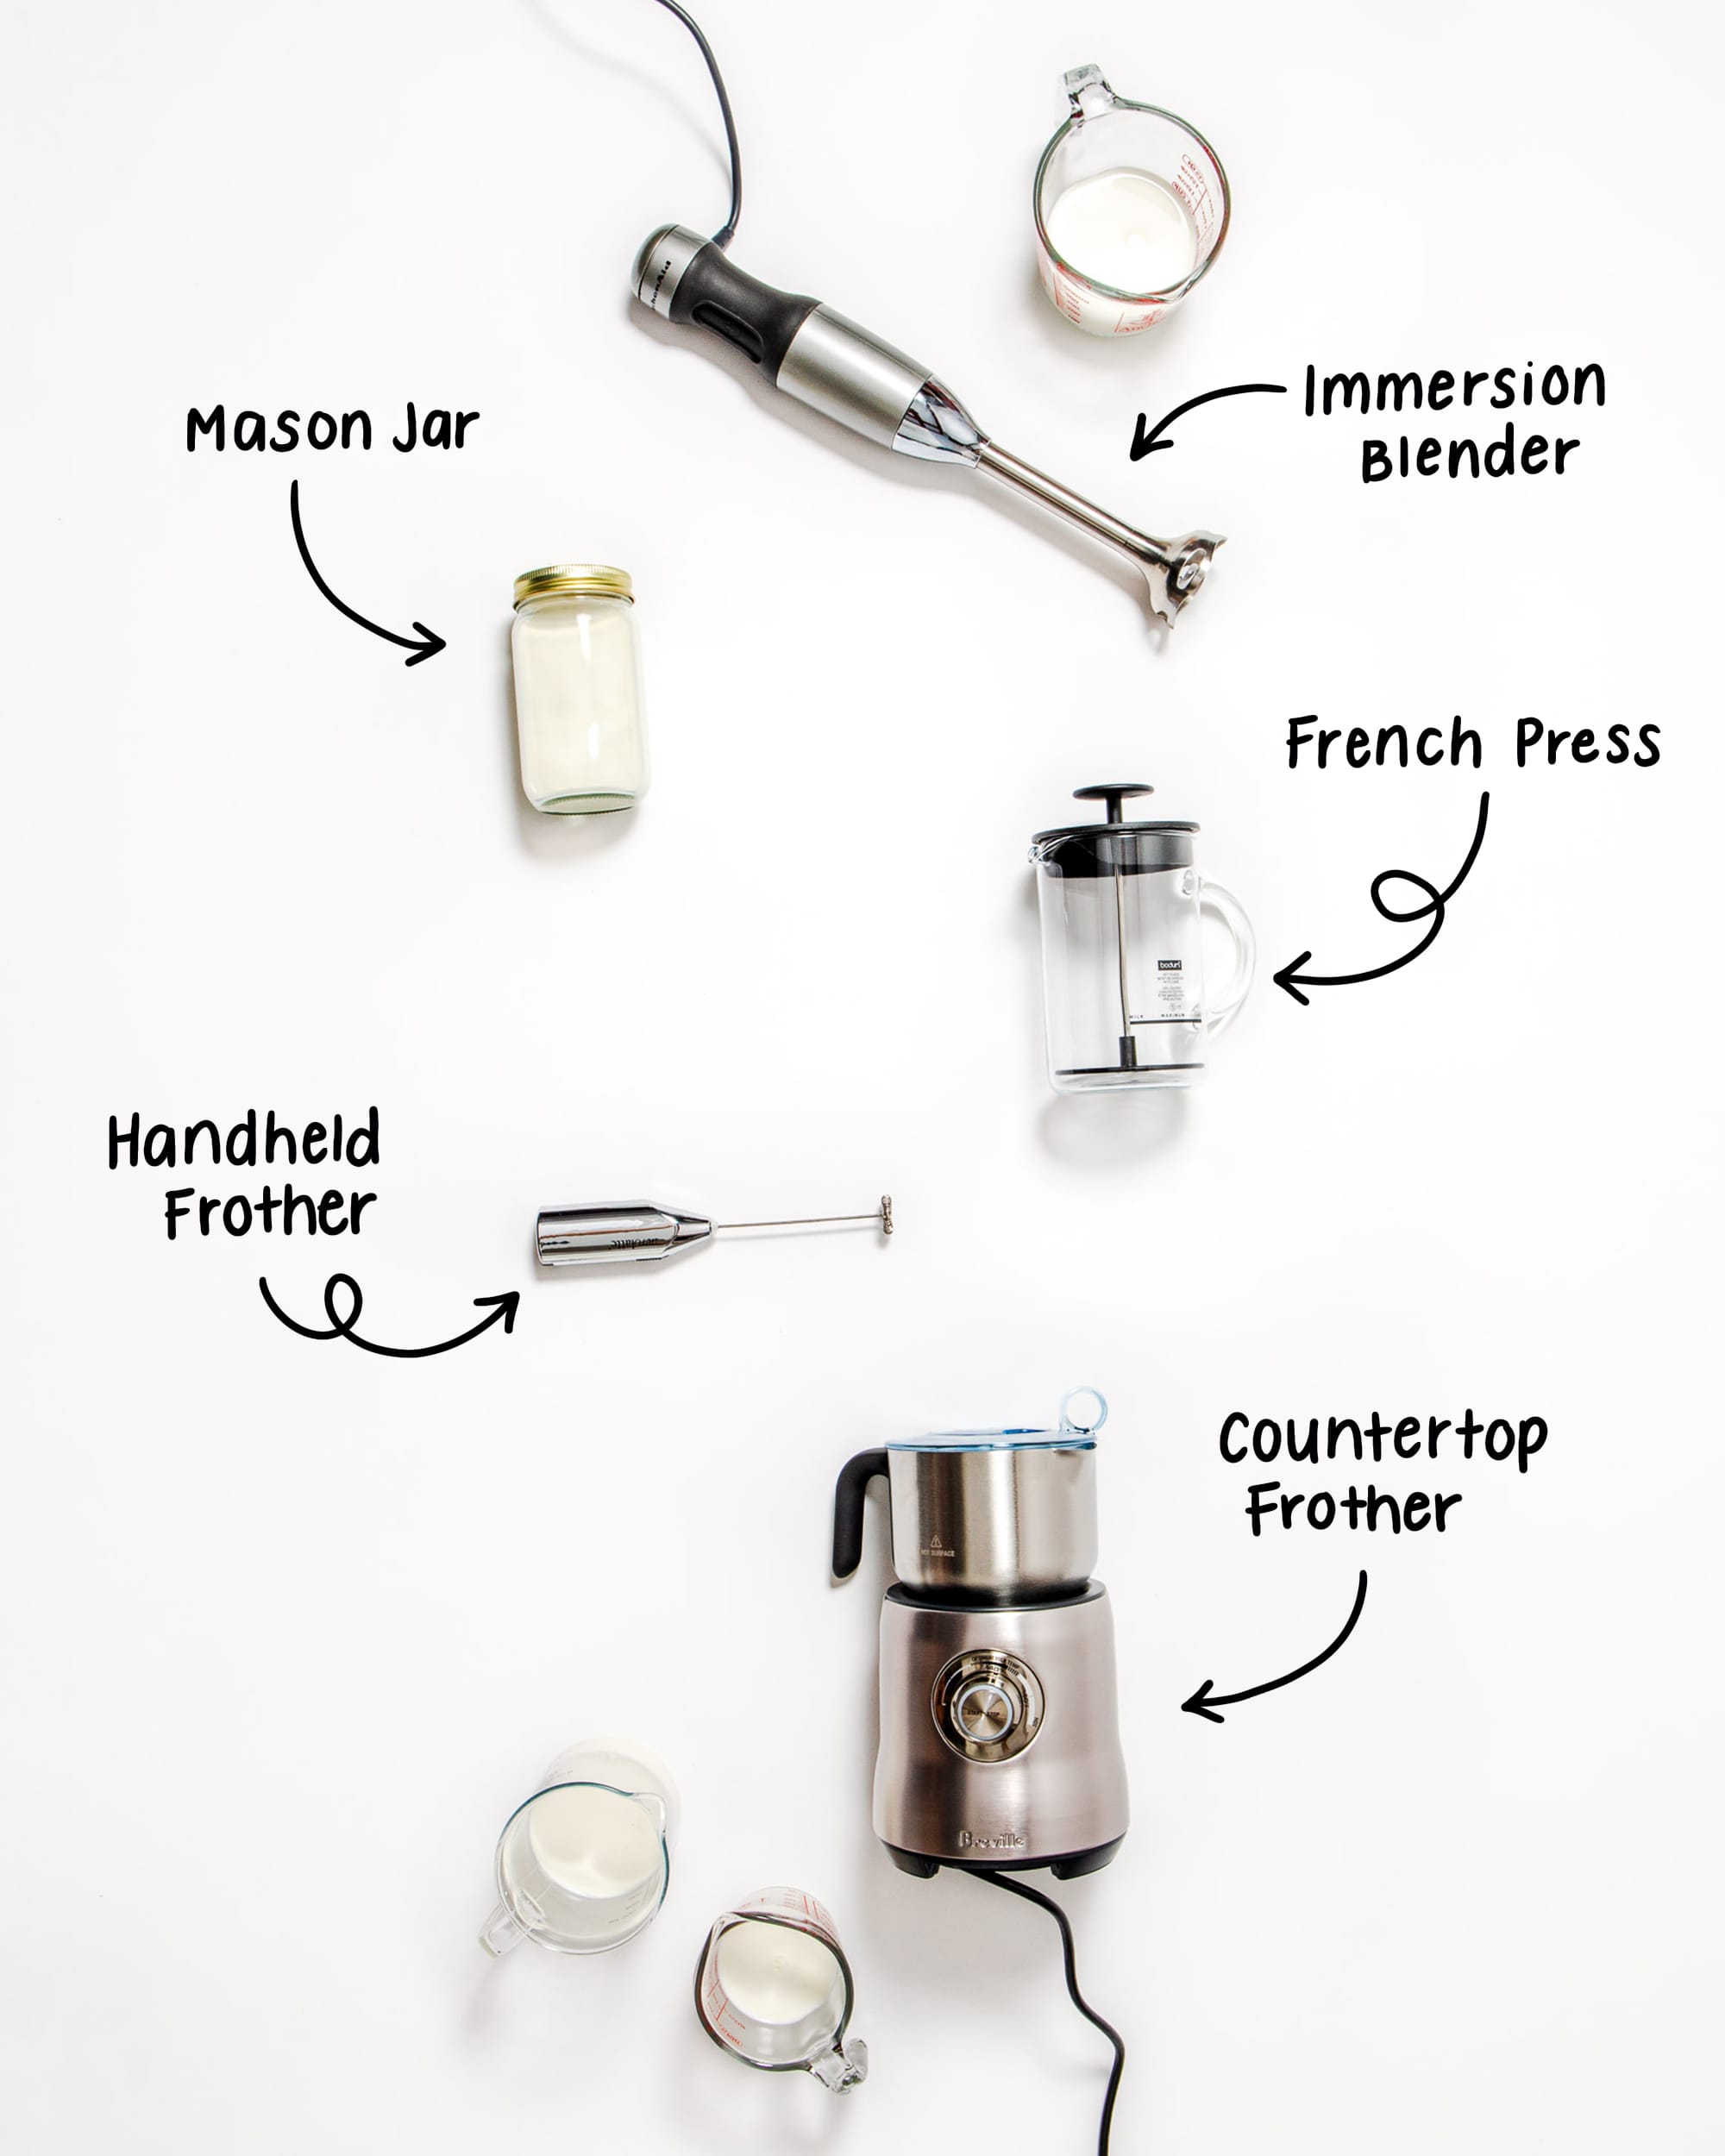 https://cdn.apartmenttherapy.info/image/upload/v1633015841/k/Photo/Lifestyle/2021-10-Showdown-Milk-Frothers/tools-showdown-milk-frother-inpost.jpg